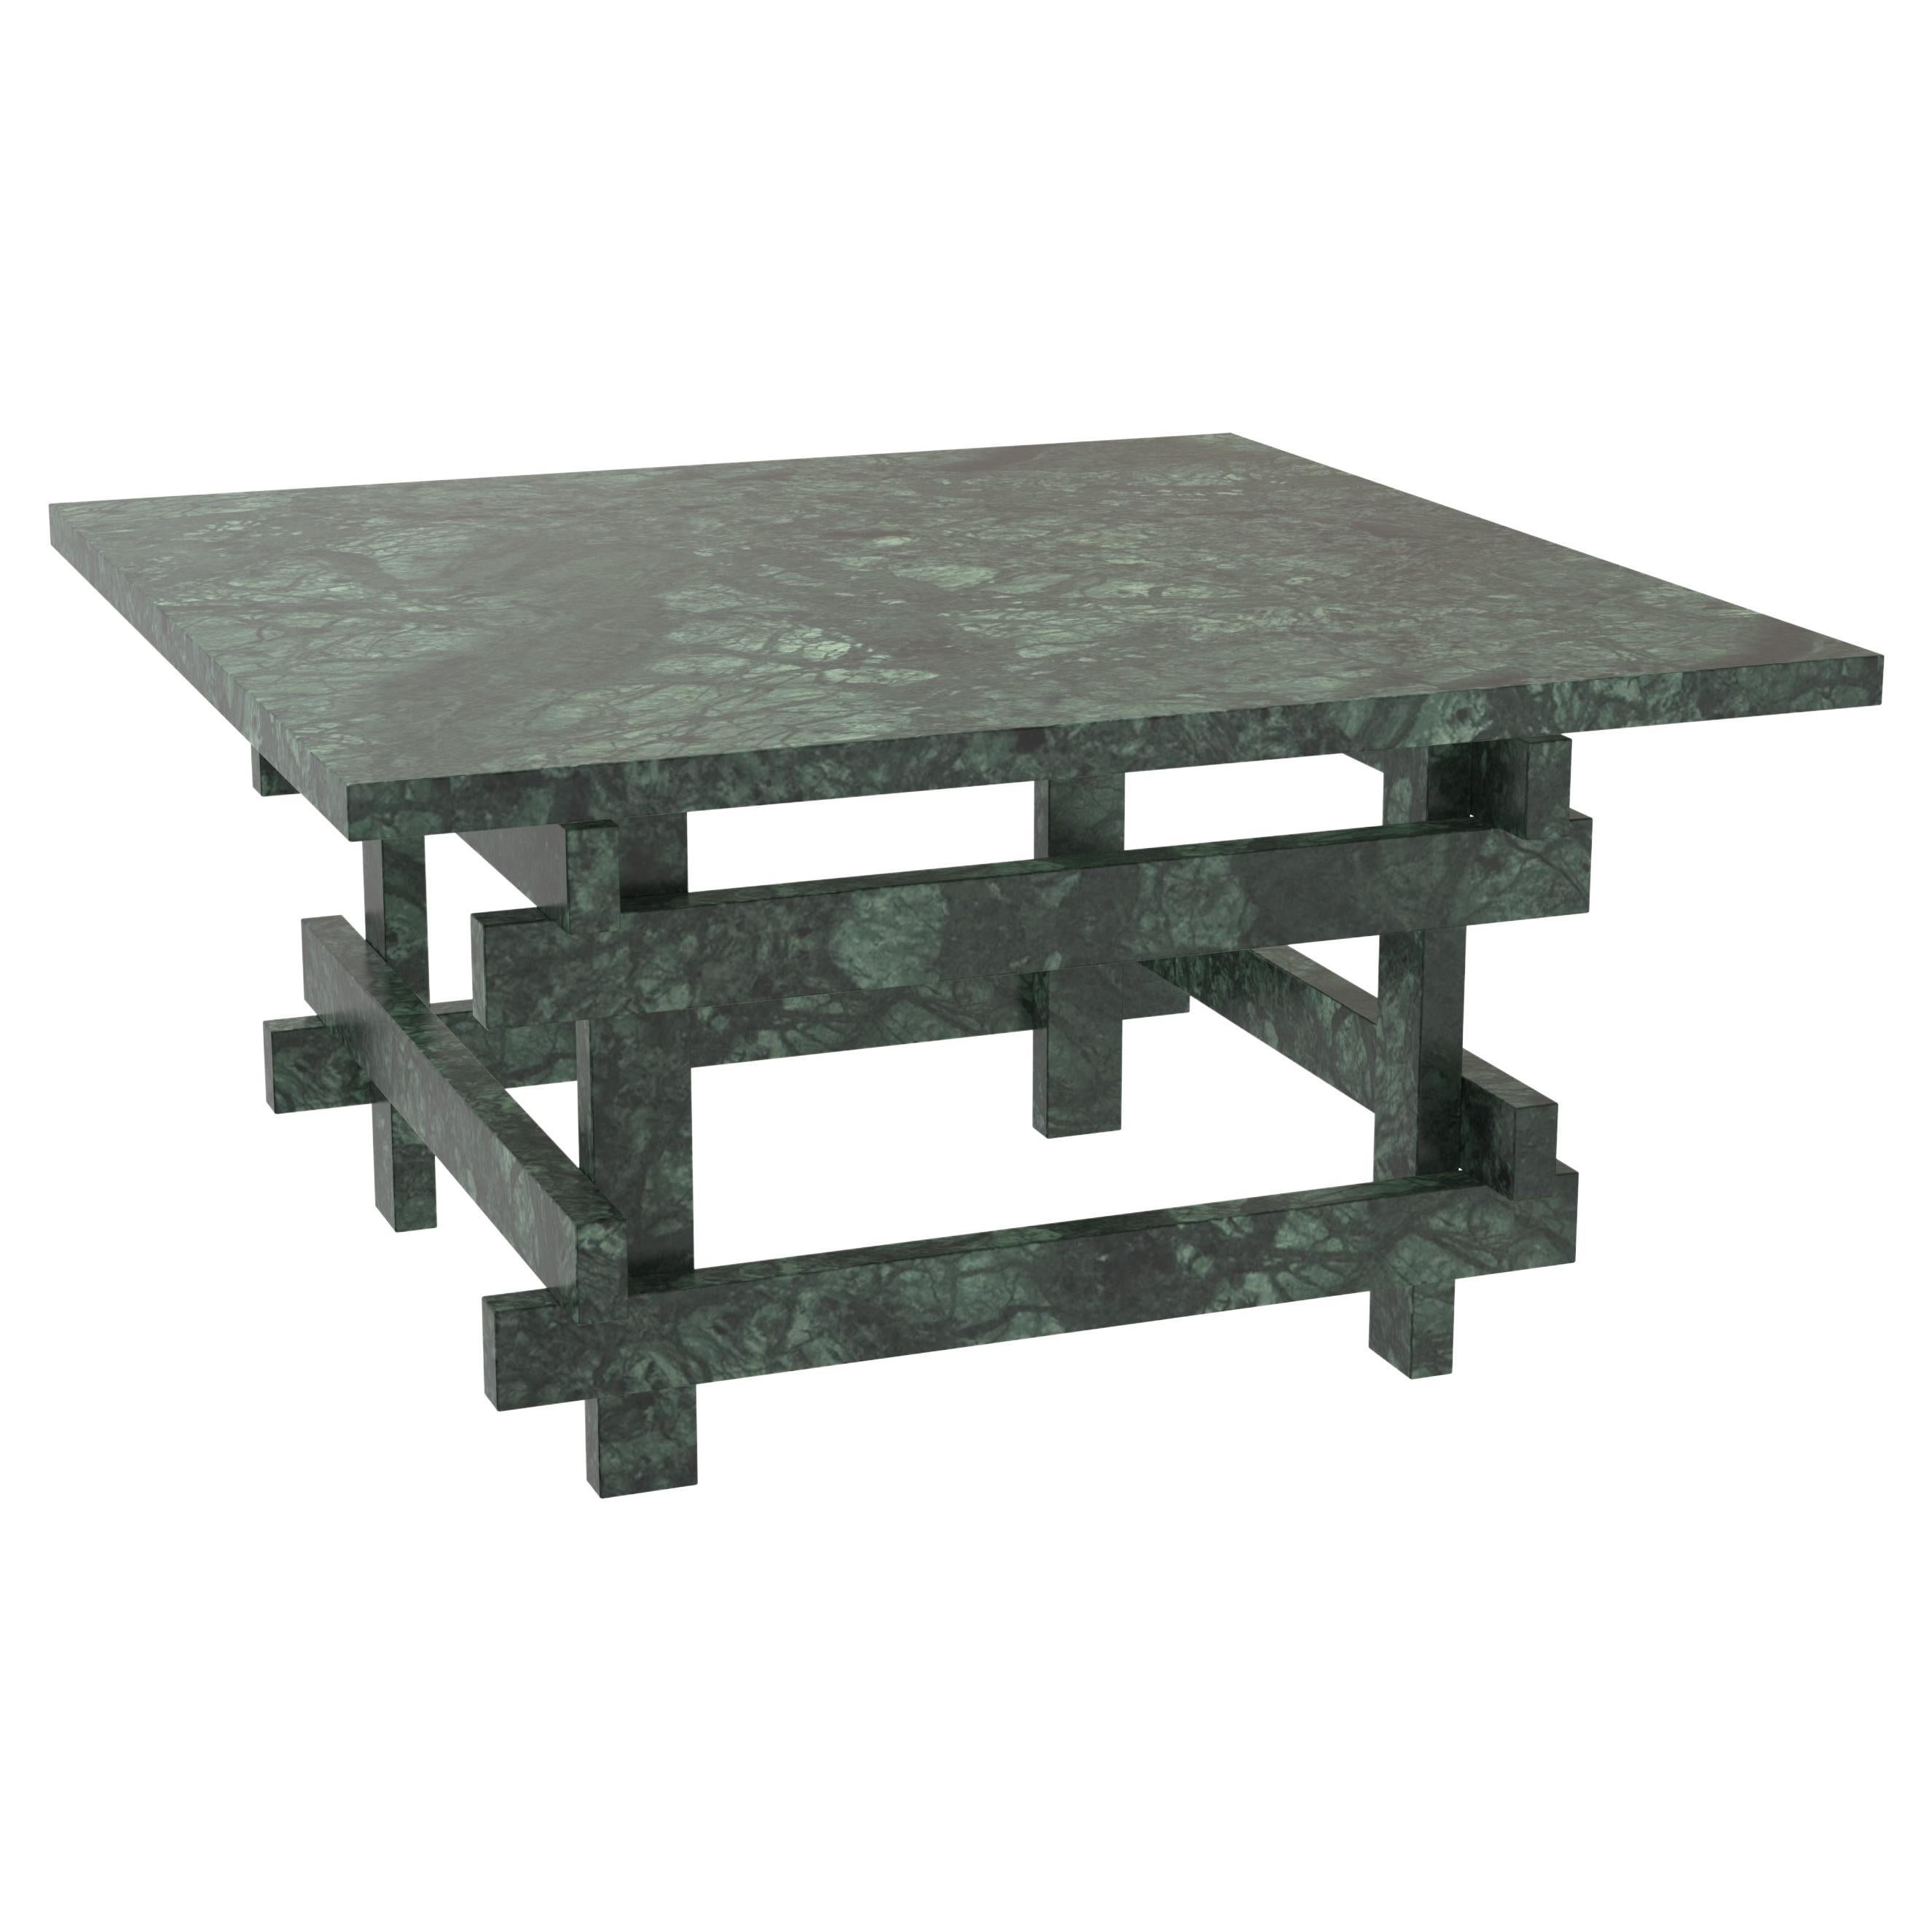 Contemporary Limited Edition Marble Table, Paranoid V2 by Edizione Limitata